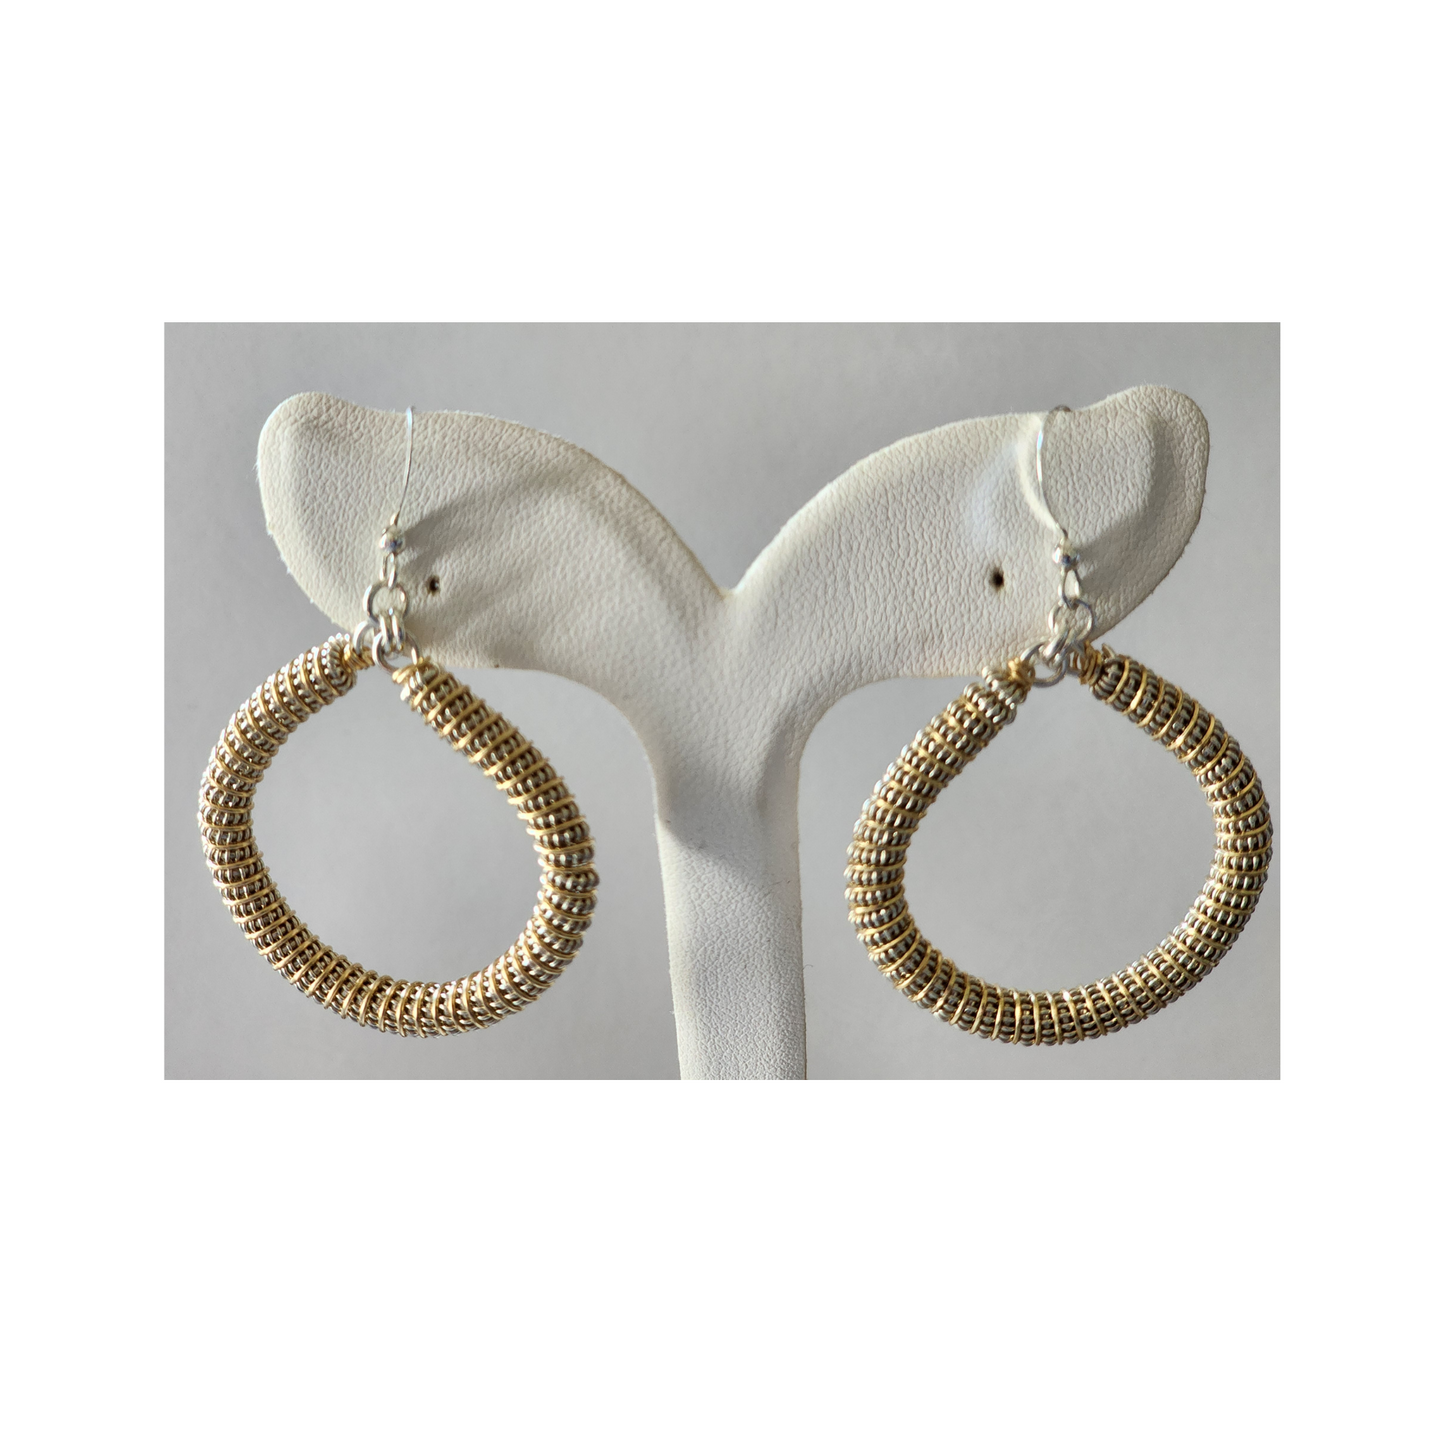 Handmade Womans Silver and Gold Double Coil Hoop Earrings